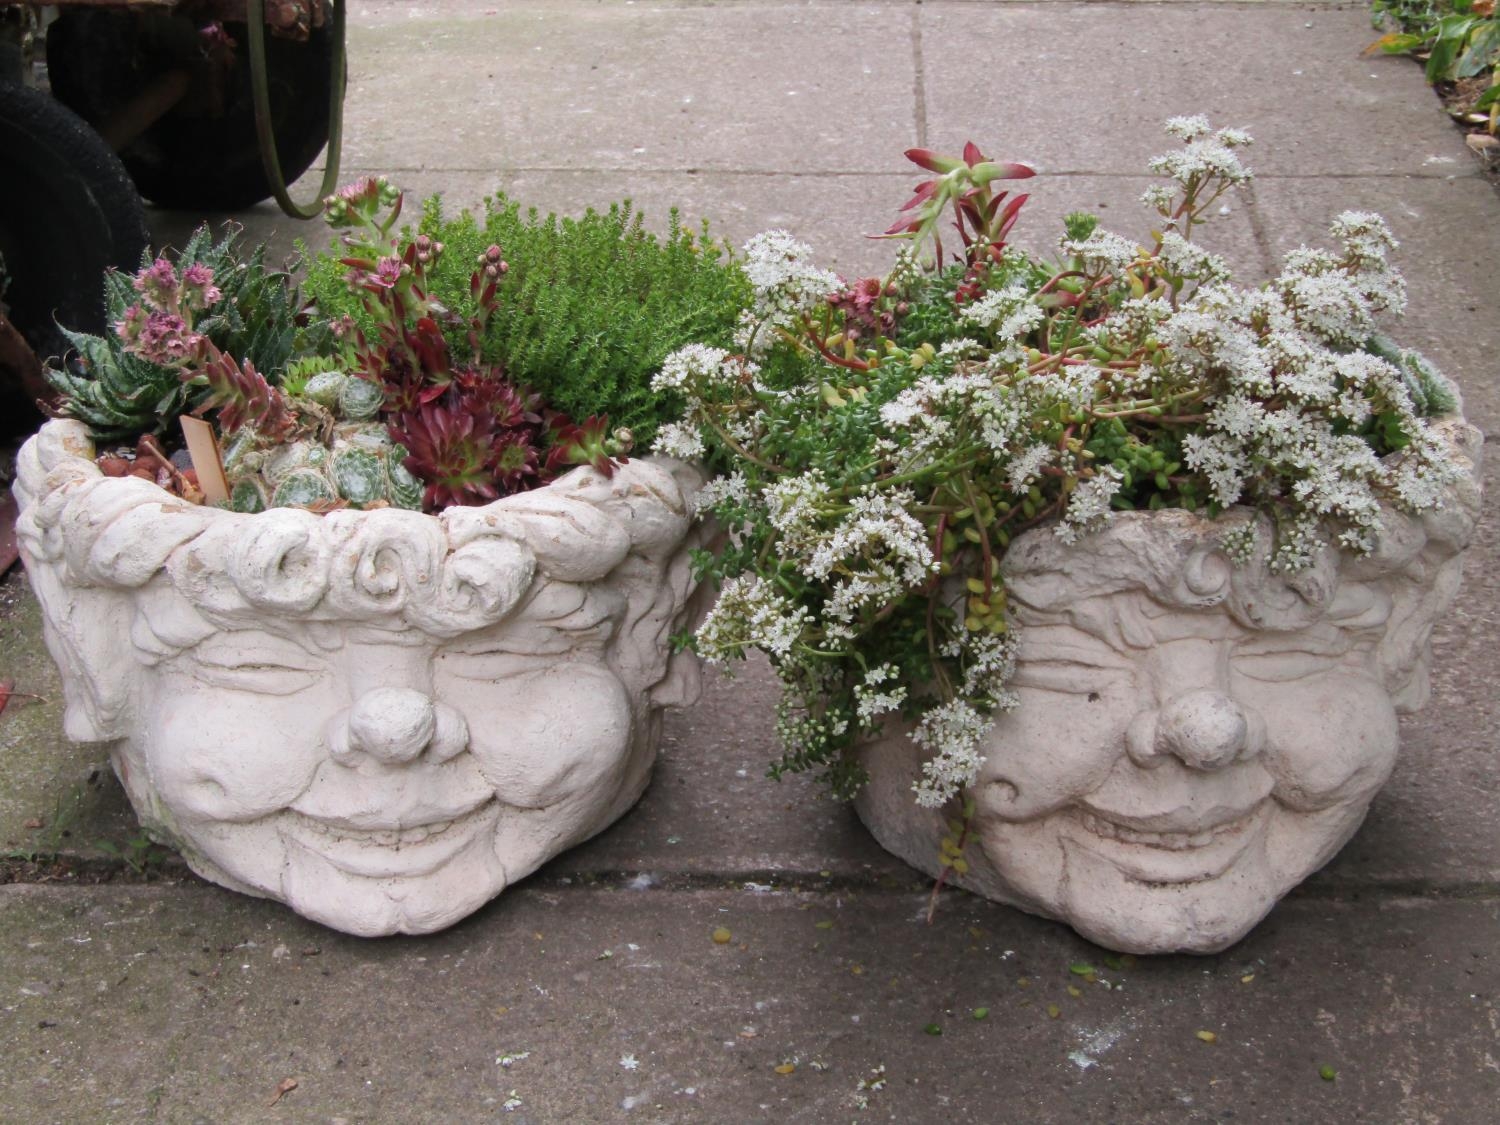 A pair of novelty comical head cast composition stone garden planters (planted) 23 cm high